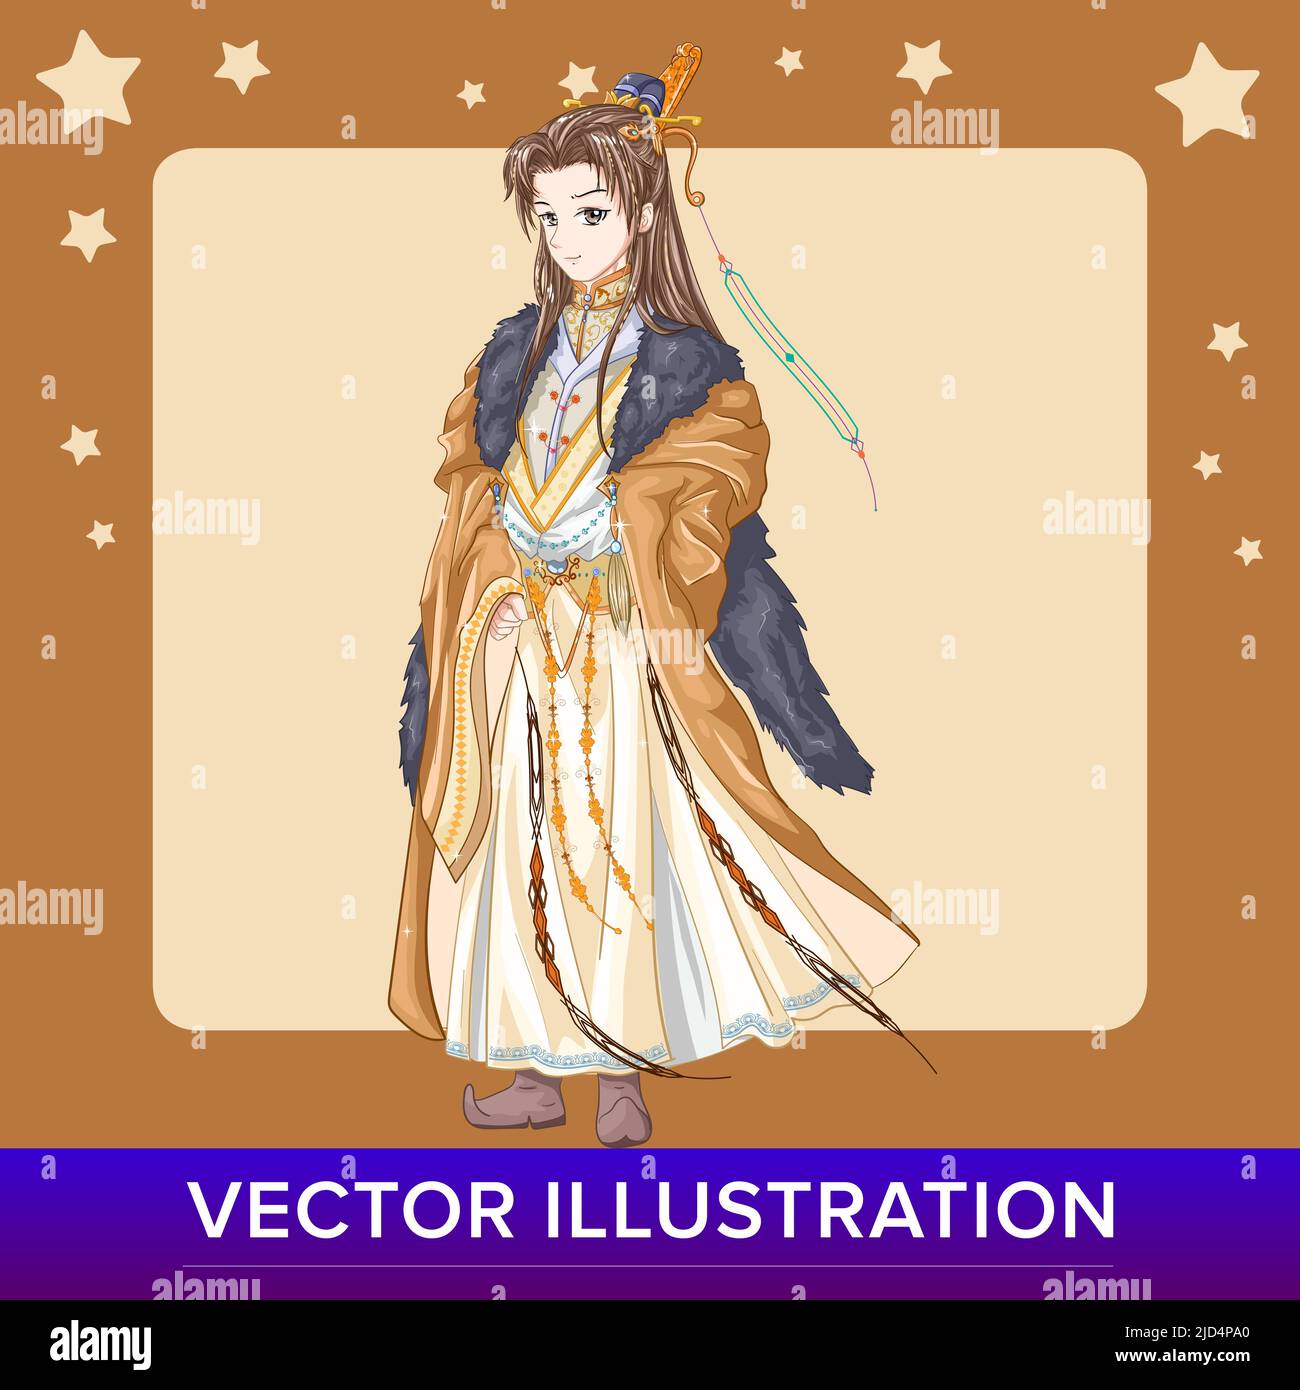 Design character a king emperor of an ancient kingdom character design vector illustration in anime / manga style Stock Vector